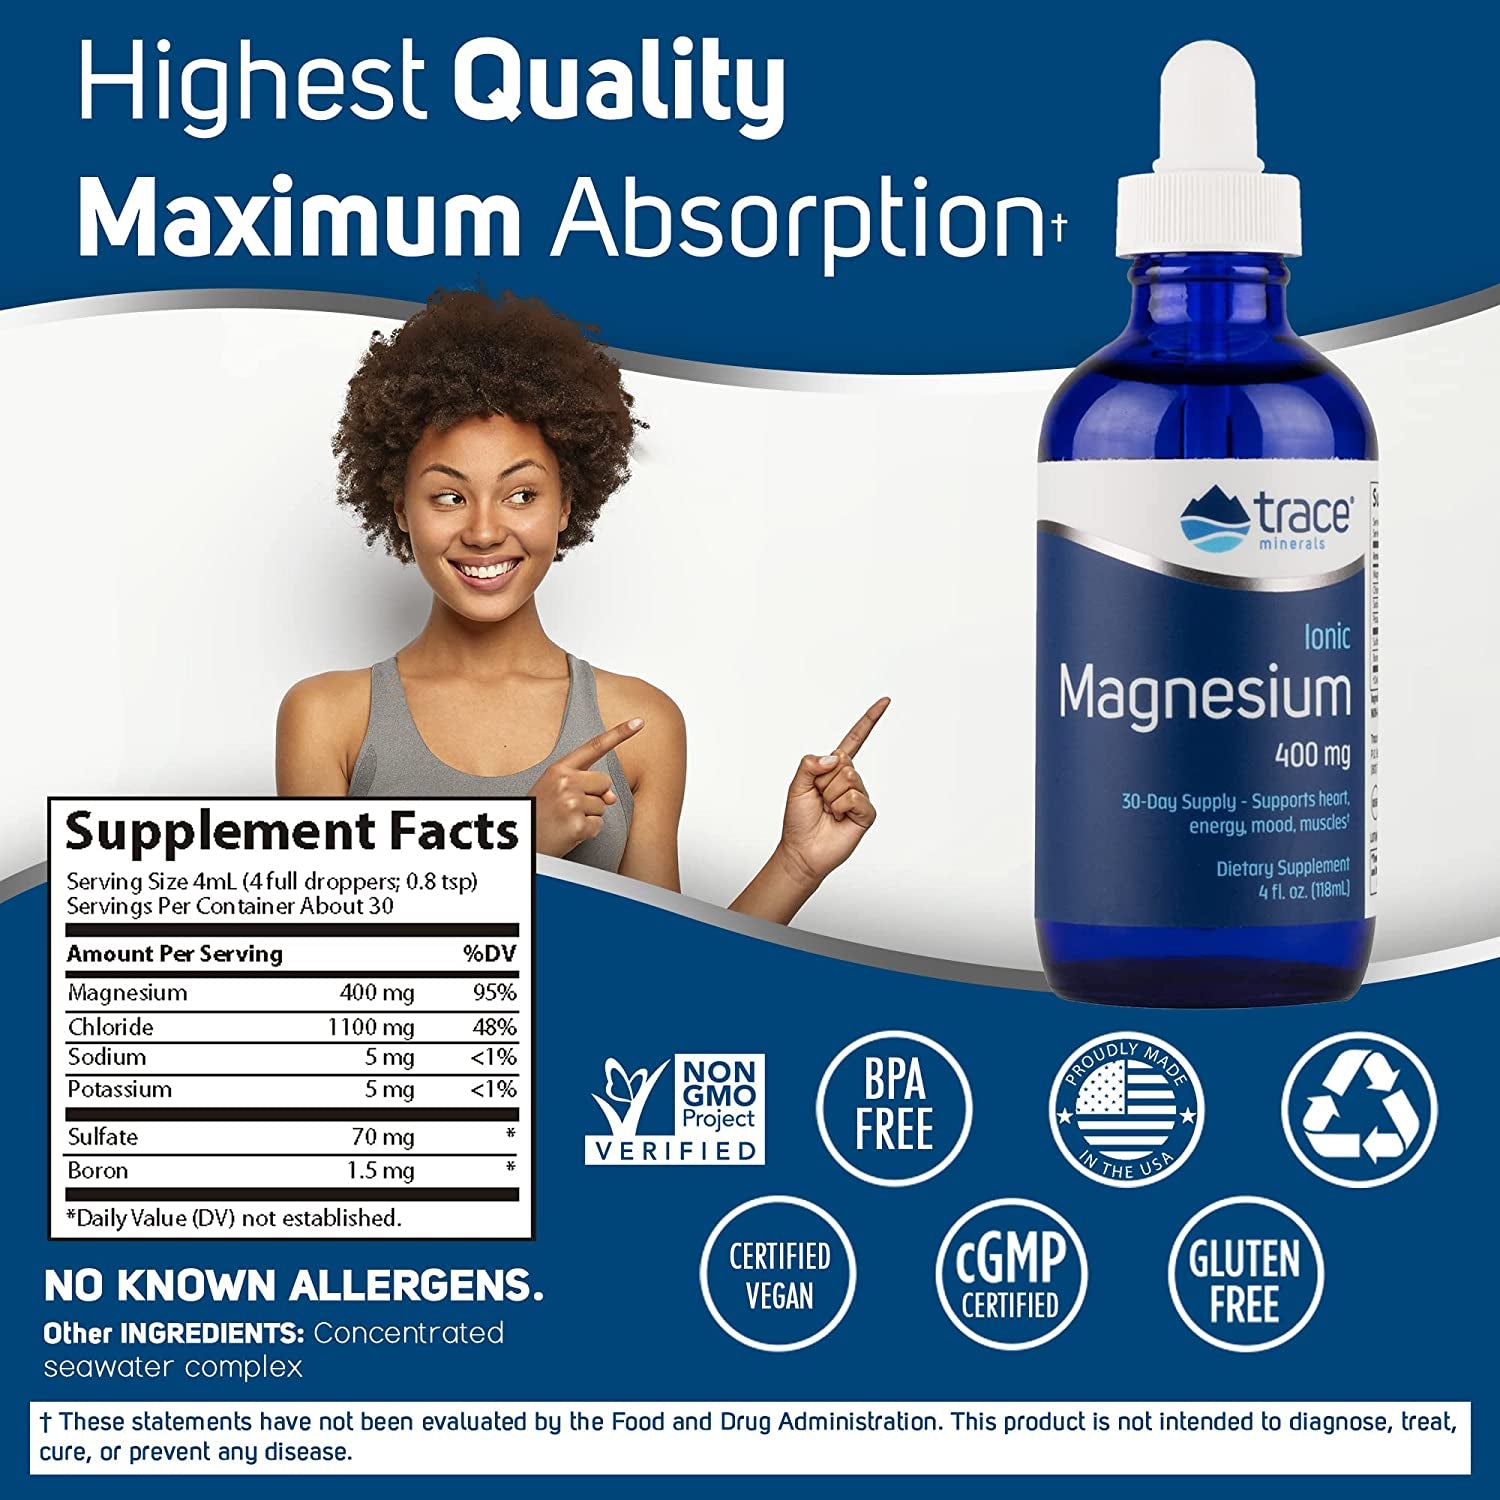 "Essential Ionic Magnesium Drops | Supports Vital Body Functions | 4 Fl Oz (32 Servings)"